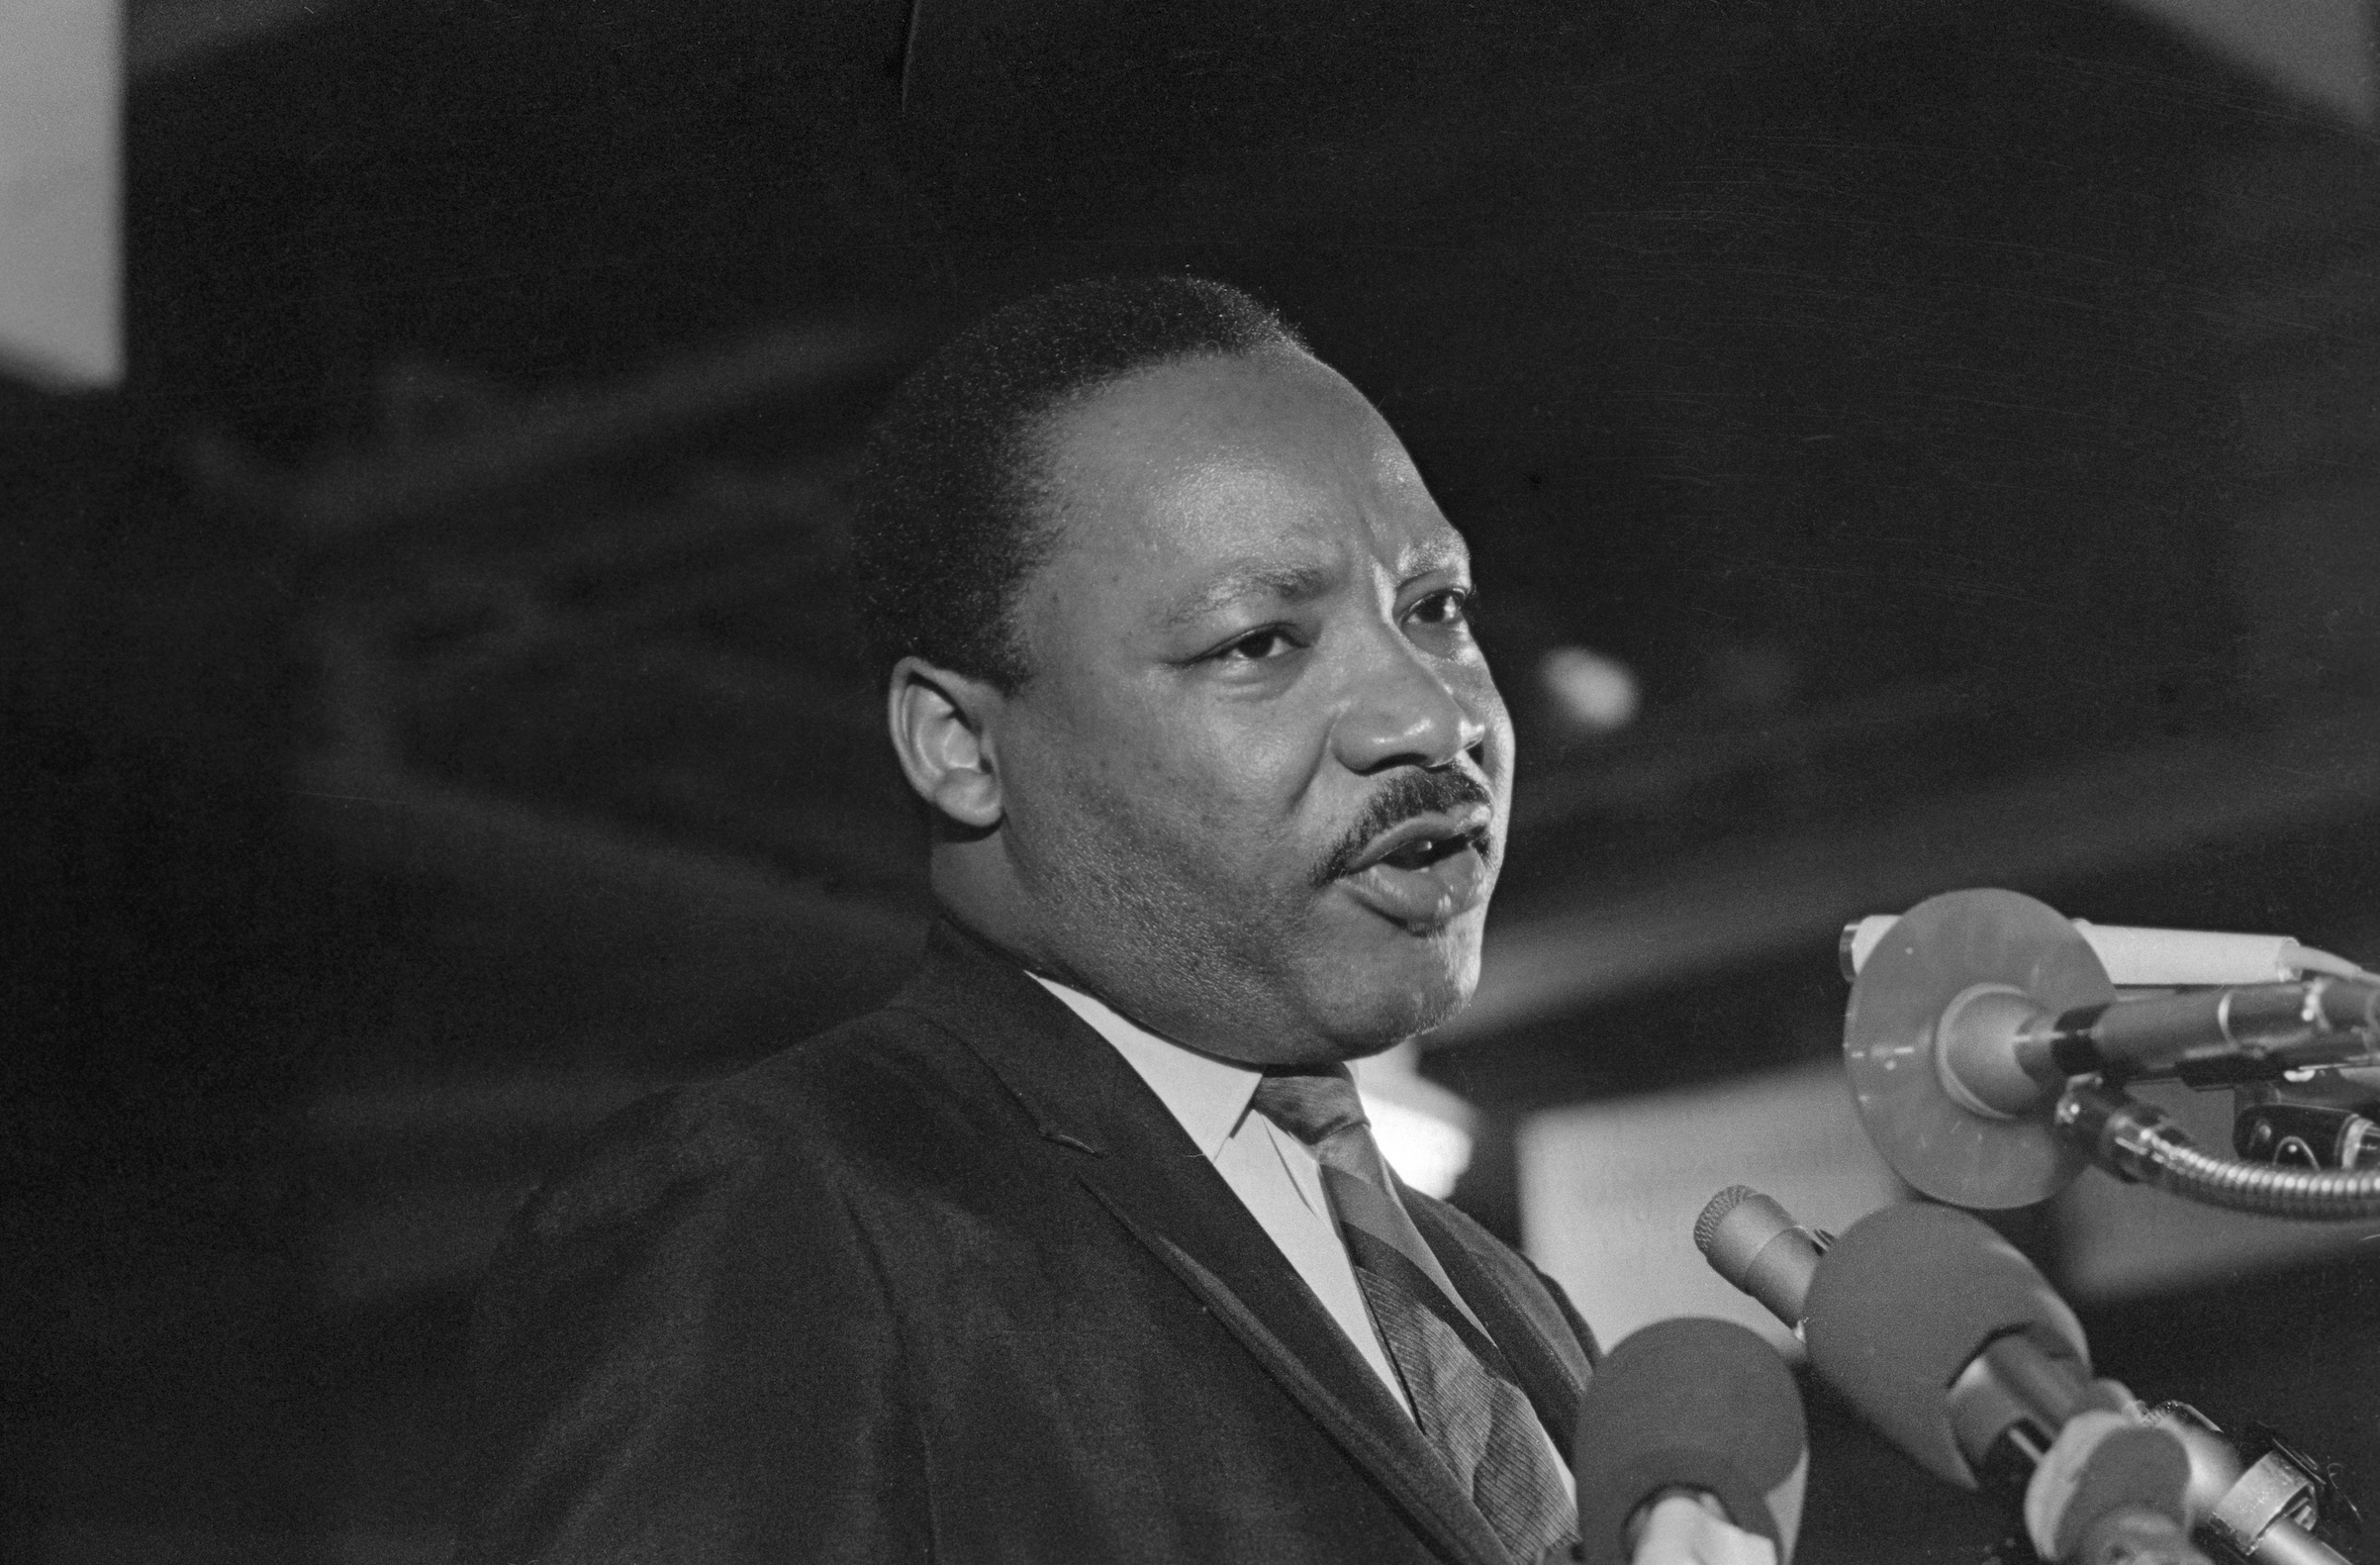 Dr. Martin Luther King Jr., Speaking at Microphones